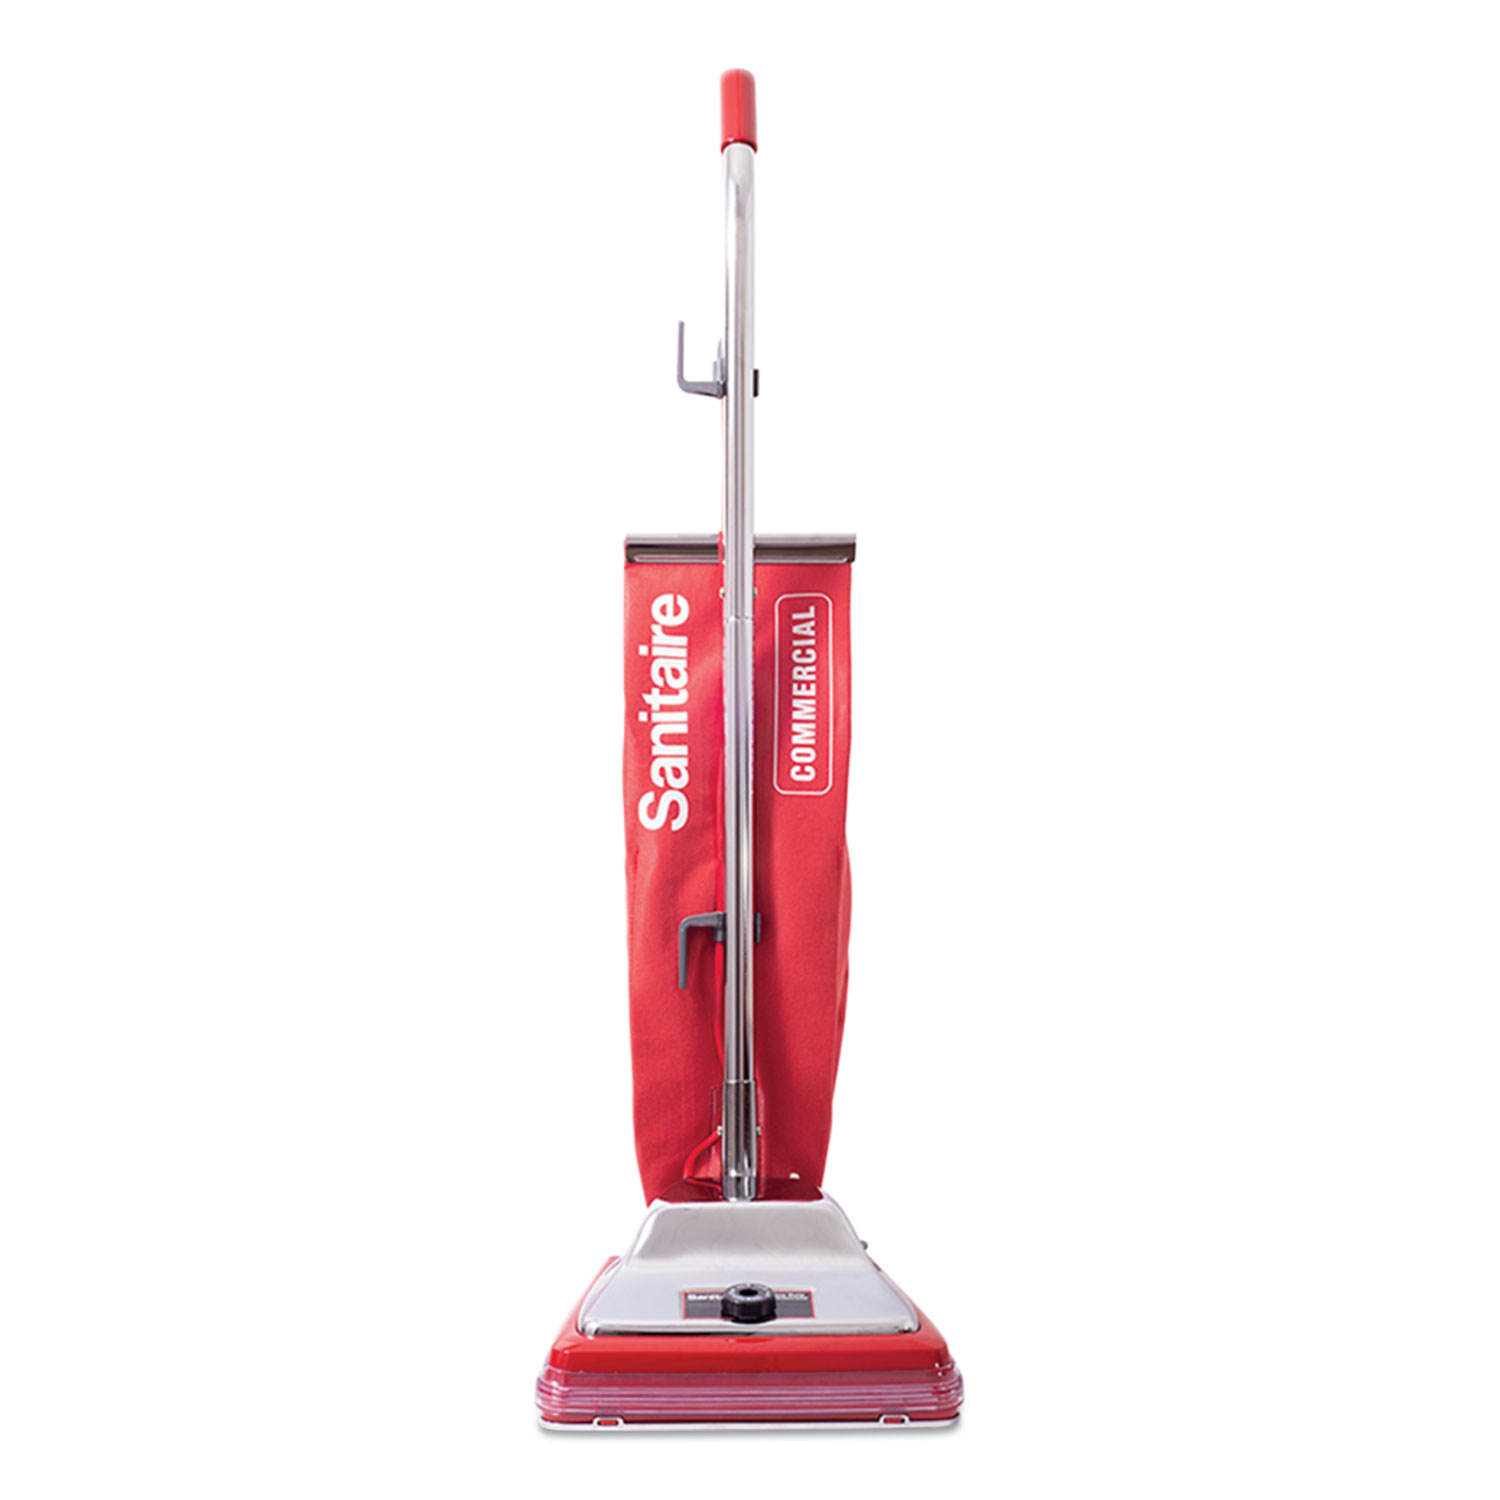  Sanitaire SC886G TRADITION Upright Vacuum with Shake-Out Bag, 17.5 lb, Red (EURSC886G) 